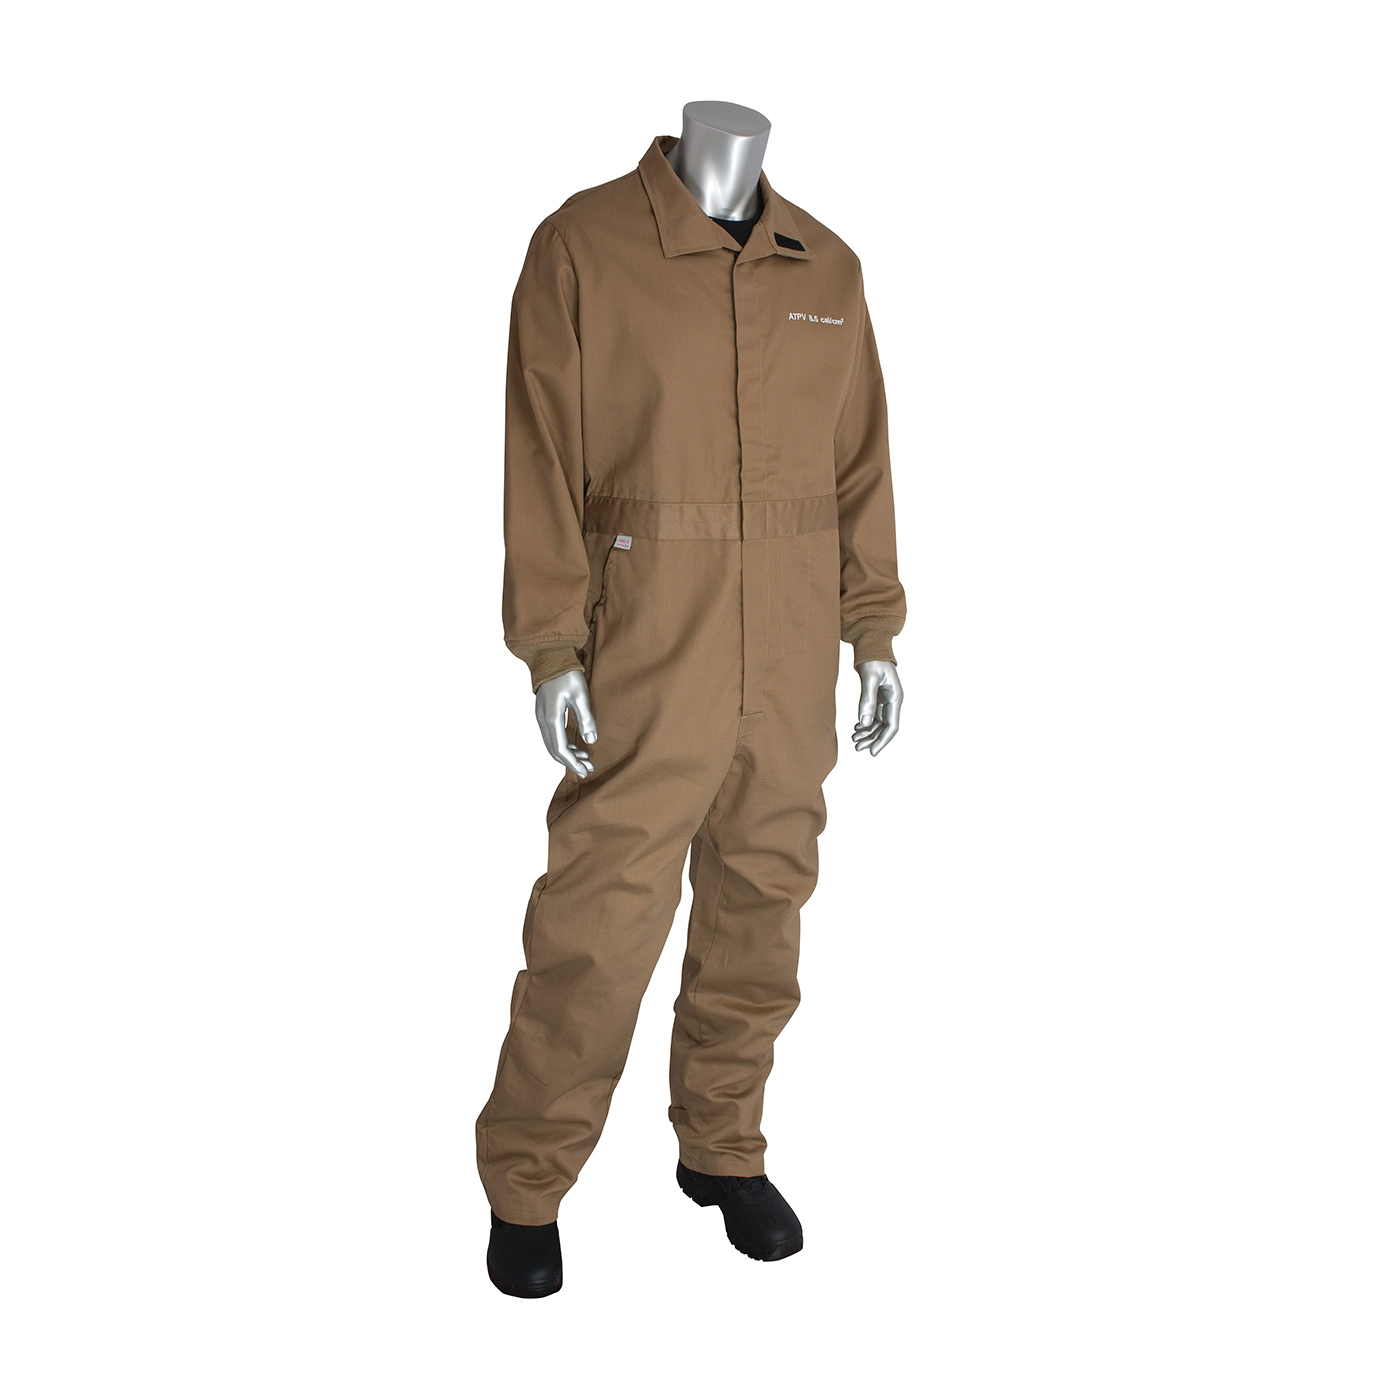 PIP® 9100-2100D/XL Flame Resistant Coverall With Vented Back, XL, Khaki, 90% Cotton/10% Nylon/FR Twill Weave, 48 to 50 in Chest, 32 in L Inseam